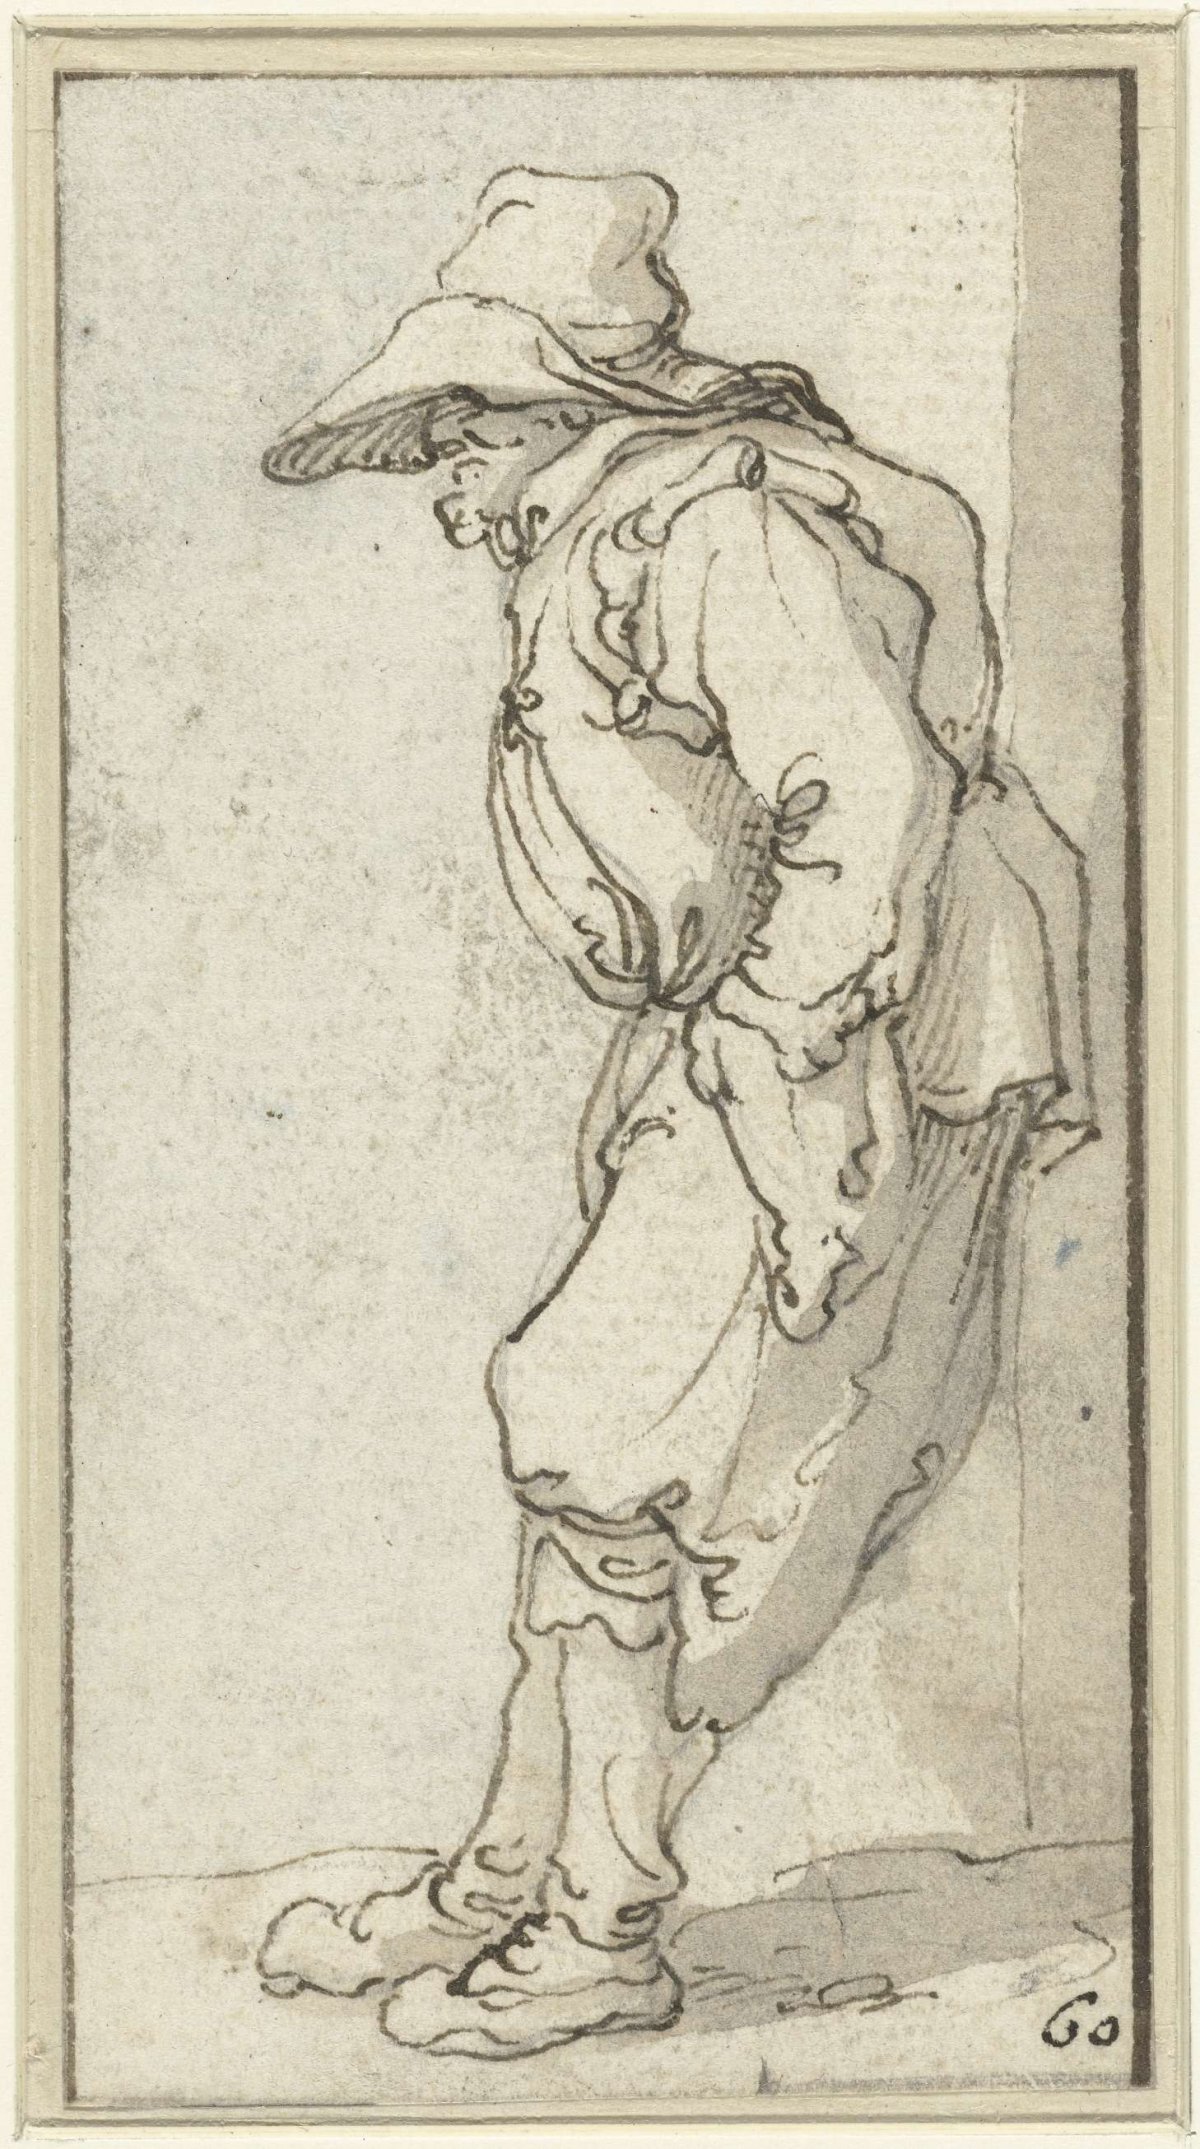 Beggar leaning against a wall, Jacob Roos, 1600 - 1760